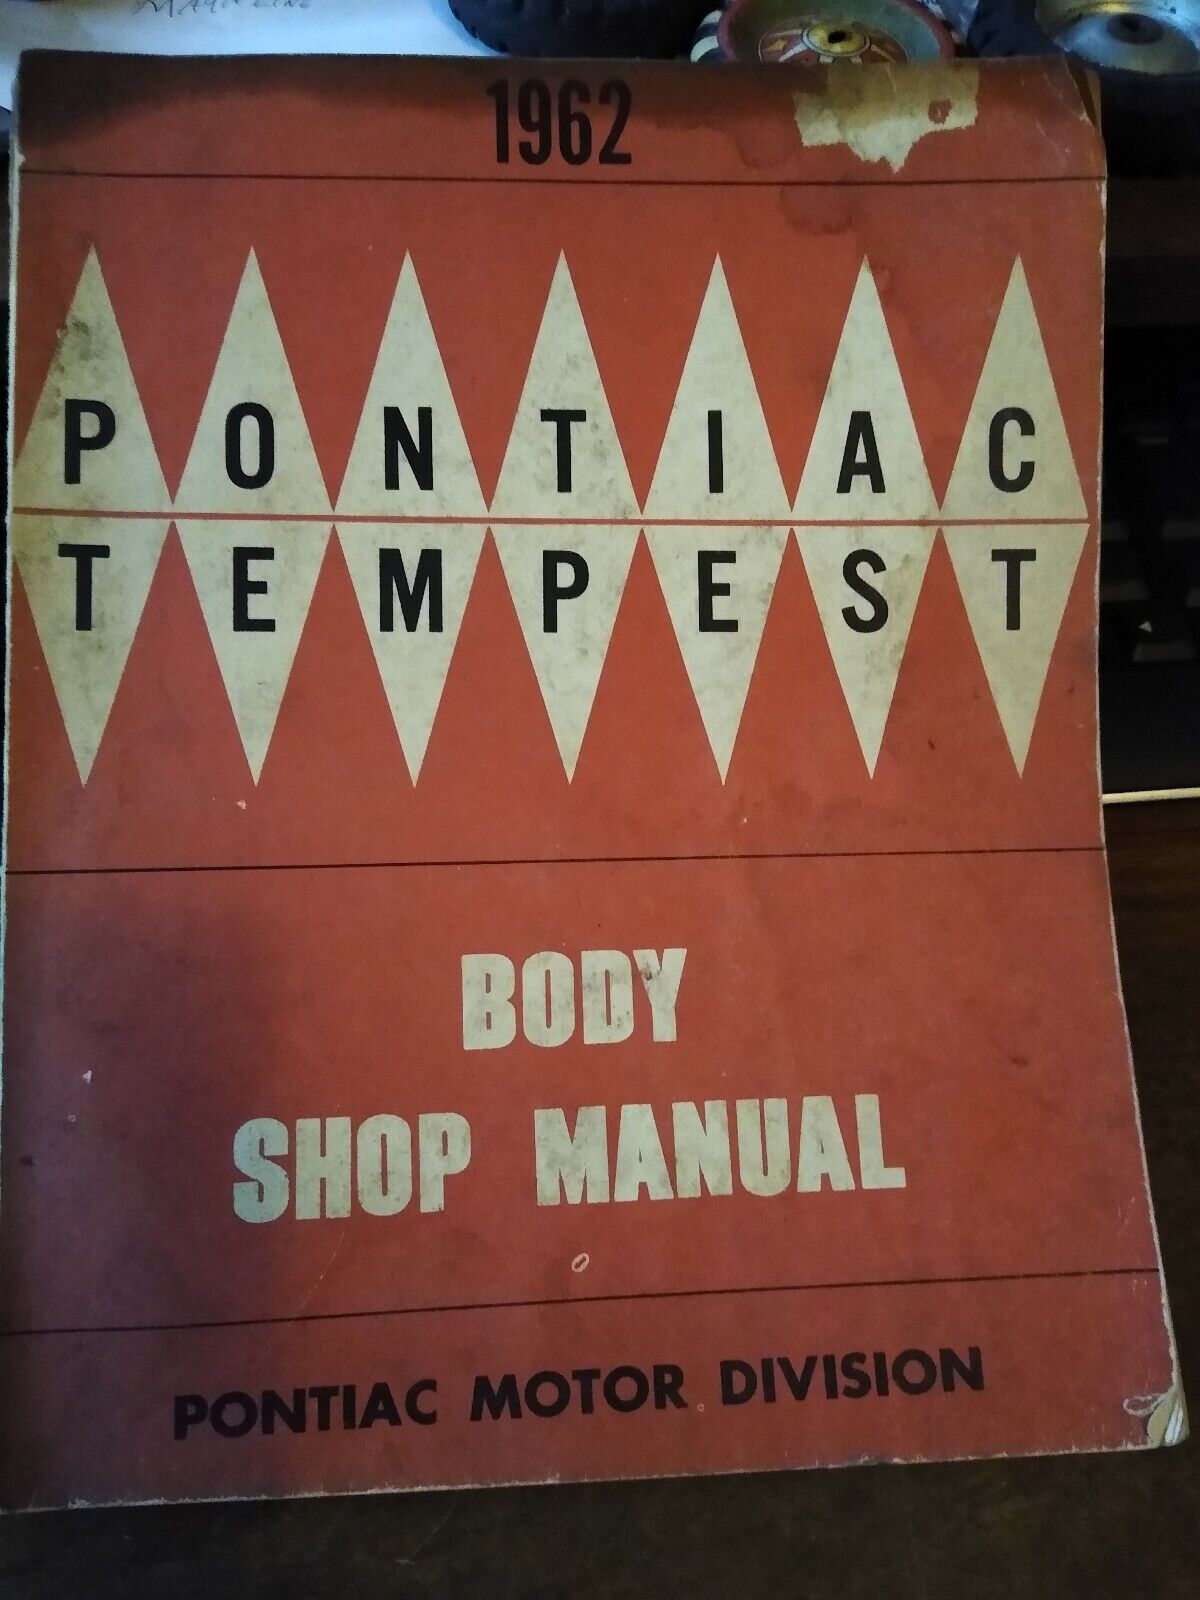 Primary image for 1962 pontiac &  tempest body shop manual original front cover torn off